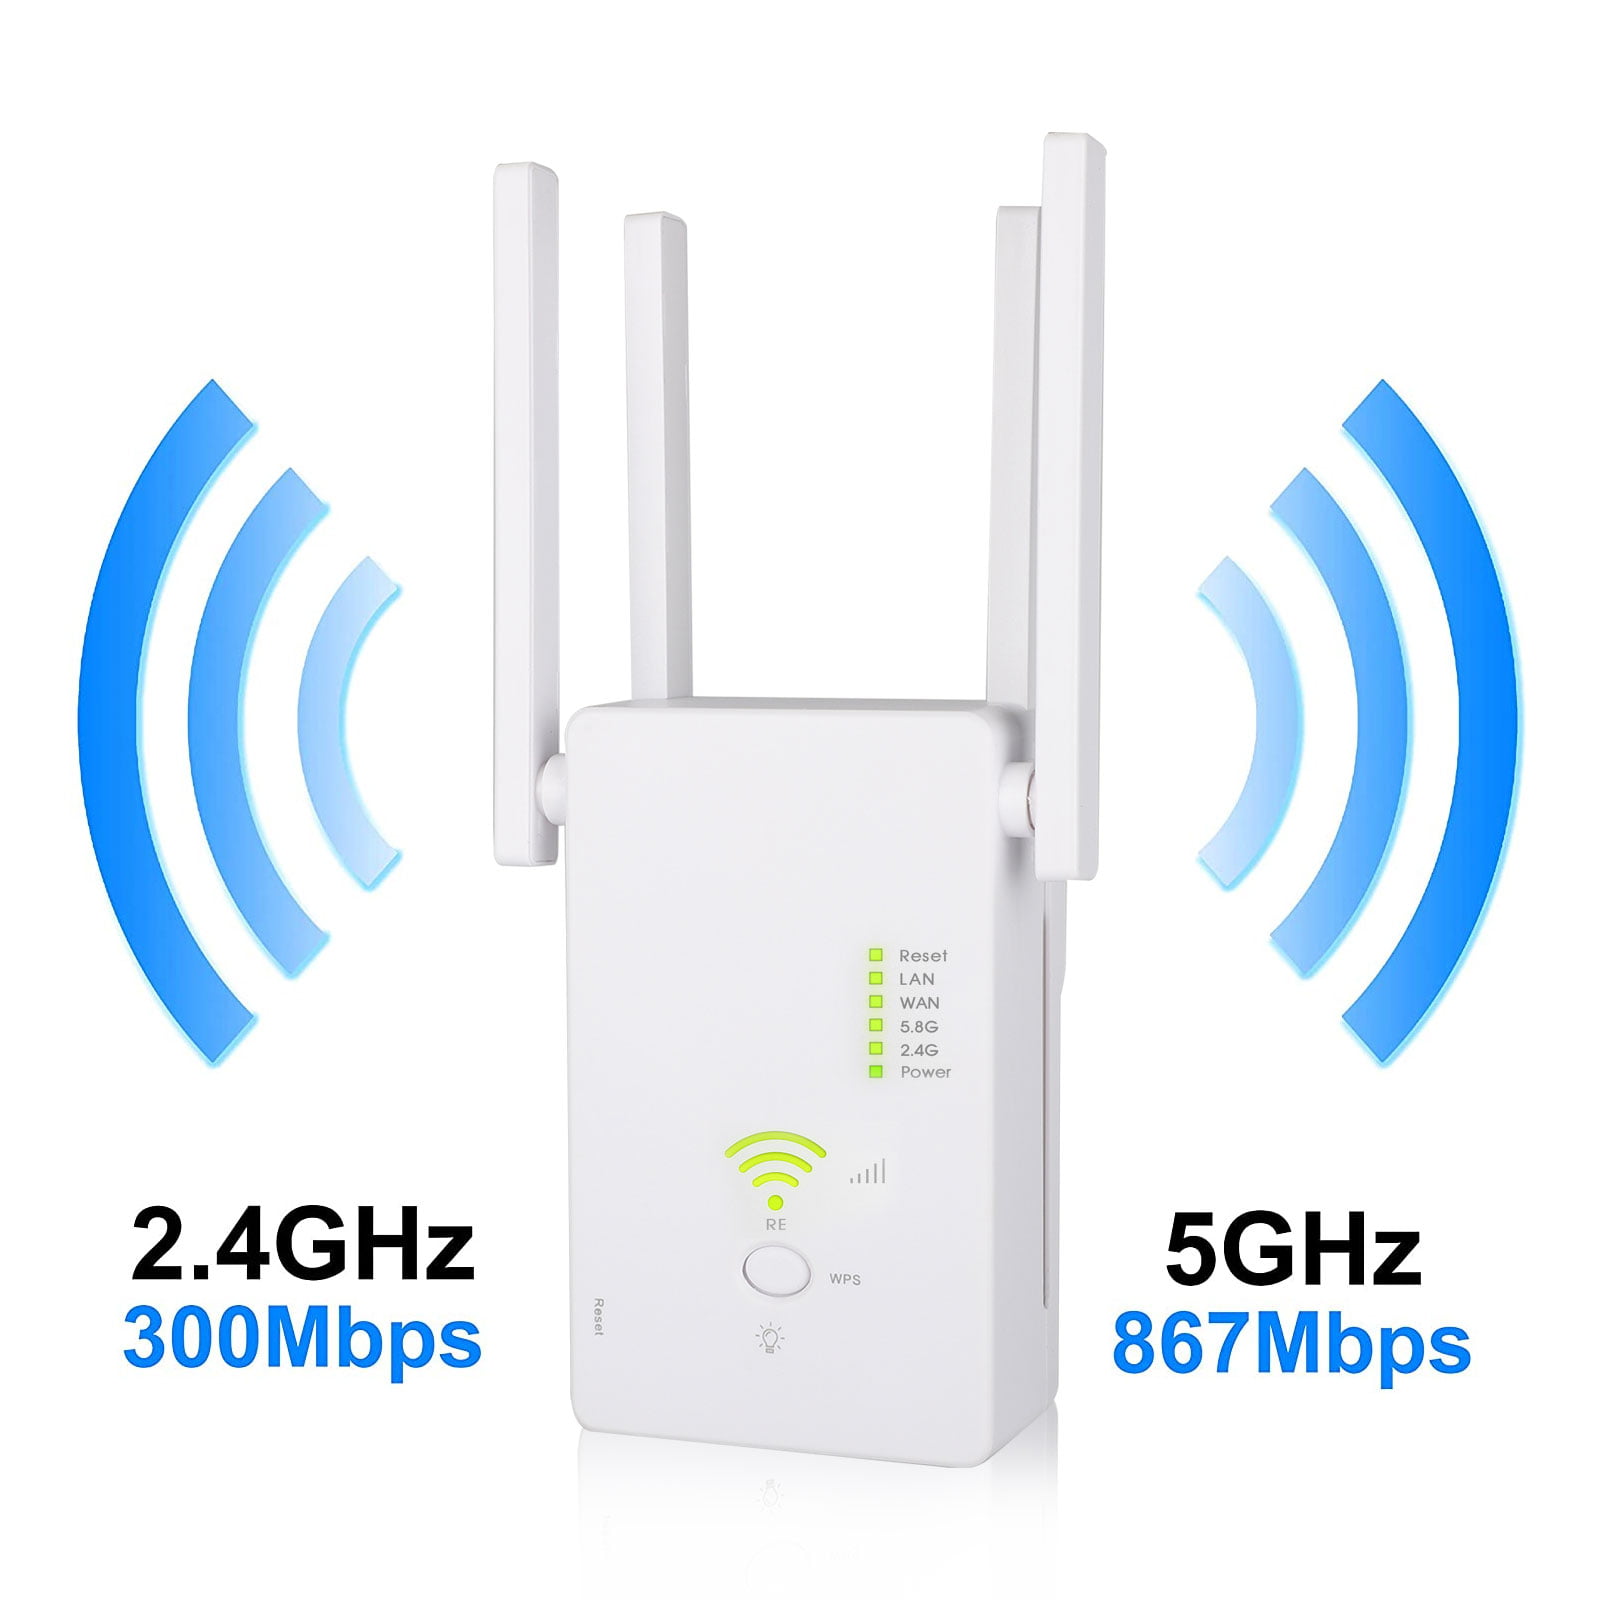 WiFi Range Extenders Signal Booster for Home WiFi Extender 1200Mbps 3 Working Modes WiFi Repeater and Signal Amplifier with Ethernet Port WiFi Booster Dual Band 2.4 & 5GHz